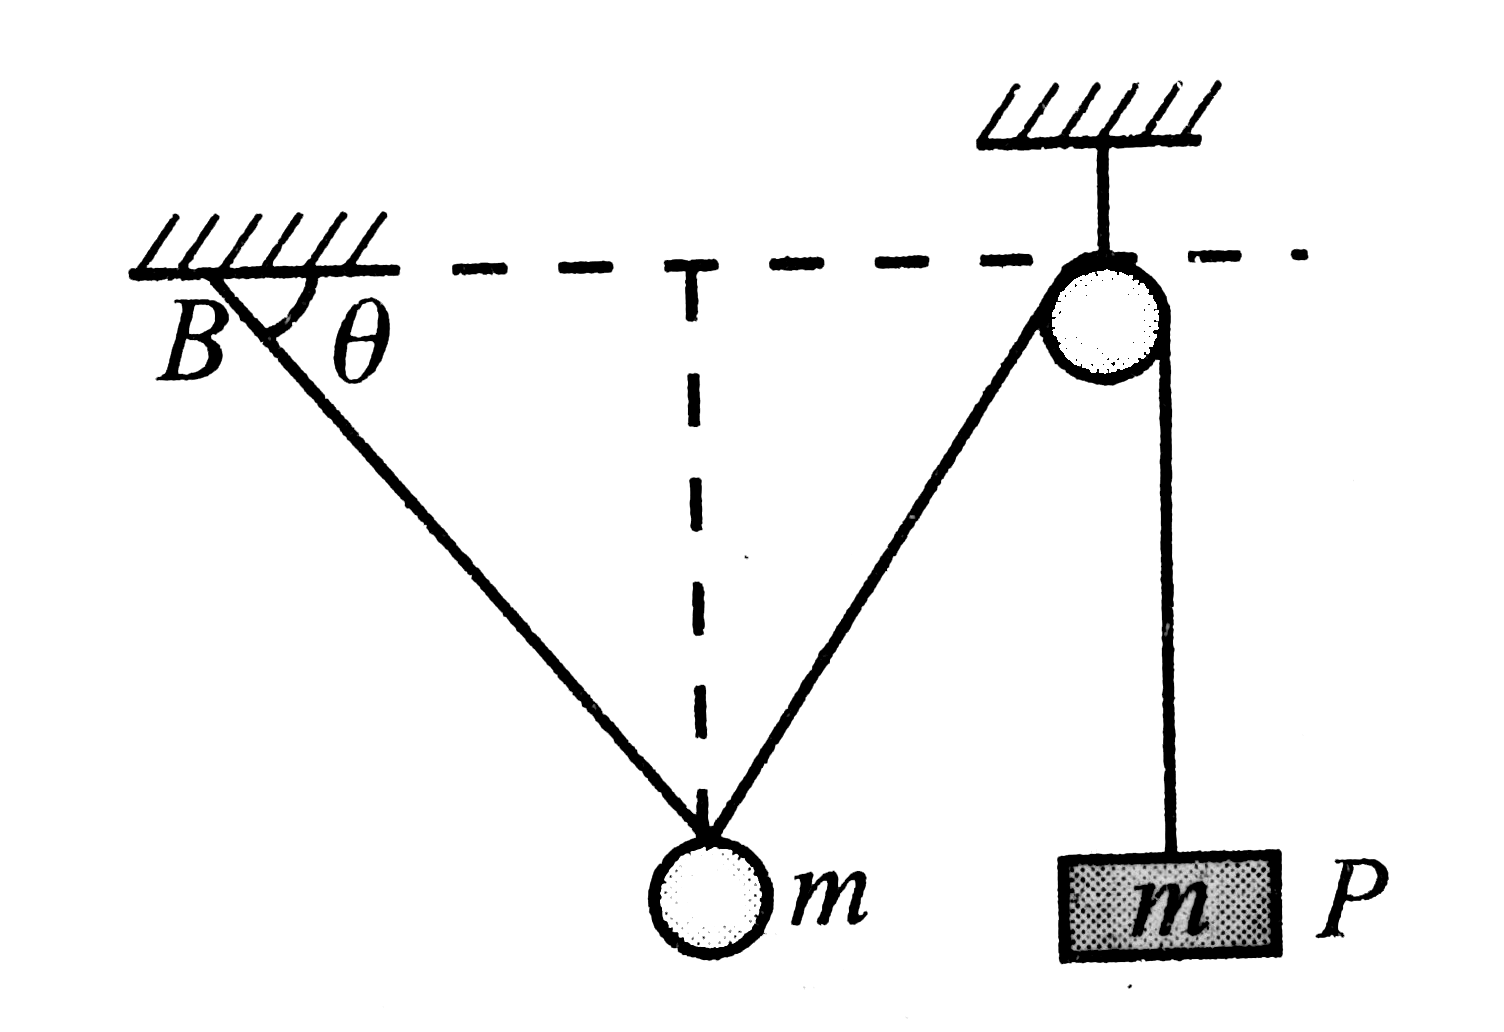 In Fig. a pulley is shown which is frictionless and a ring of mass m can slide on the string without any friction. One end of the string is attached to point B and to the other end, a block 'P' of mass m is attached. The whole system lies in vertical plane.     Now another block 'C' of same mass m is attached to the block 'P' and system is released from rest. If a(1) and a(2) are the magnitudes of initial accelerations of ring and blocks, respectively, then